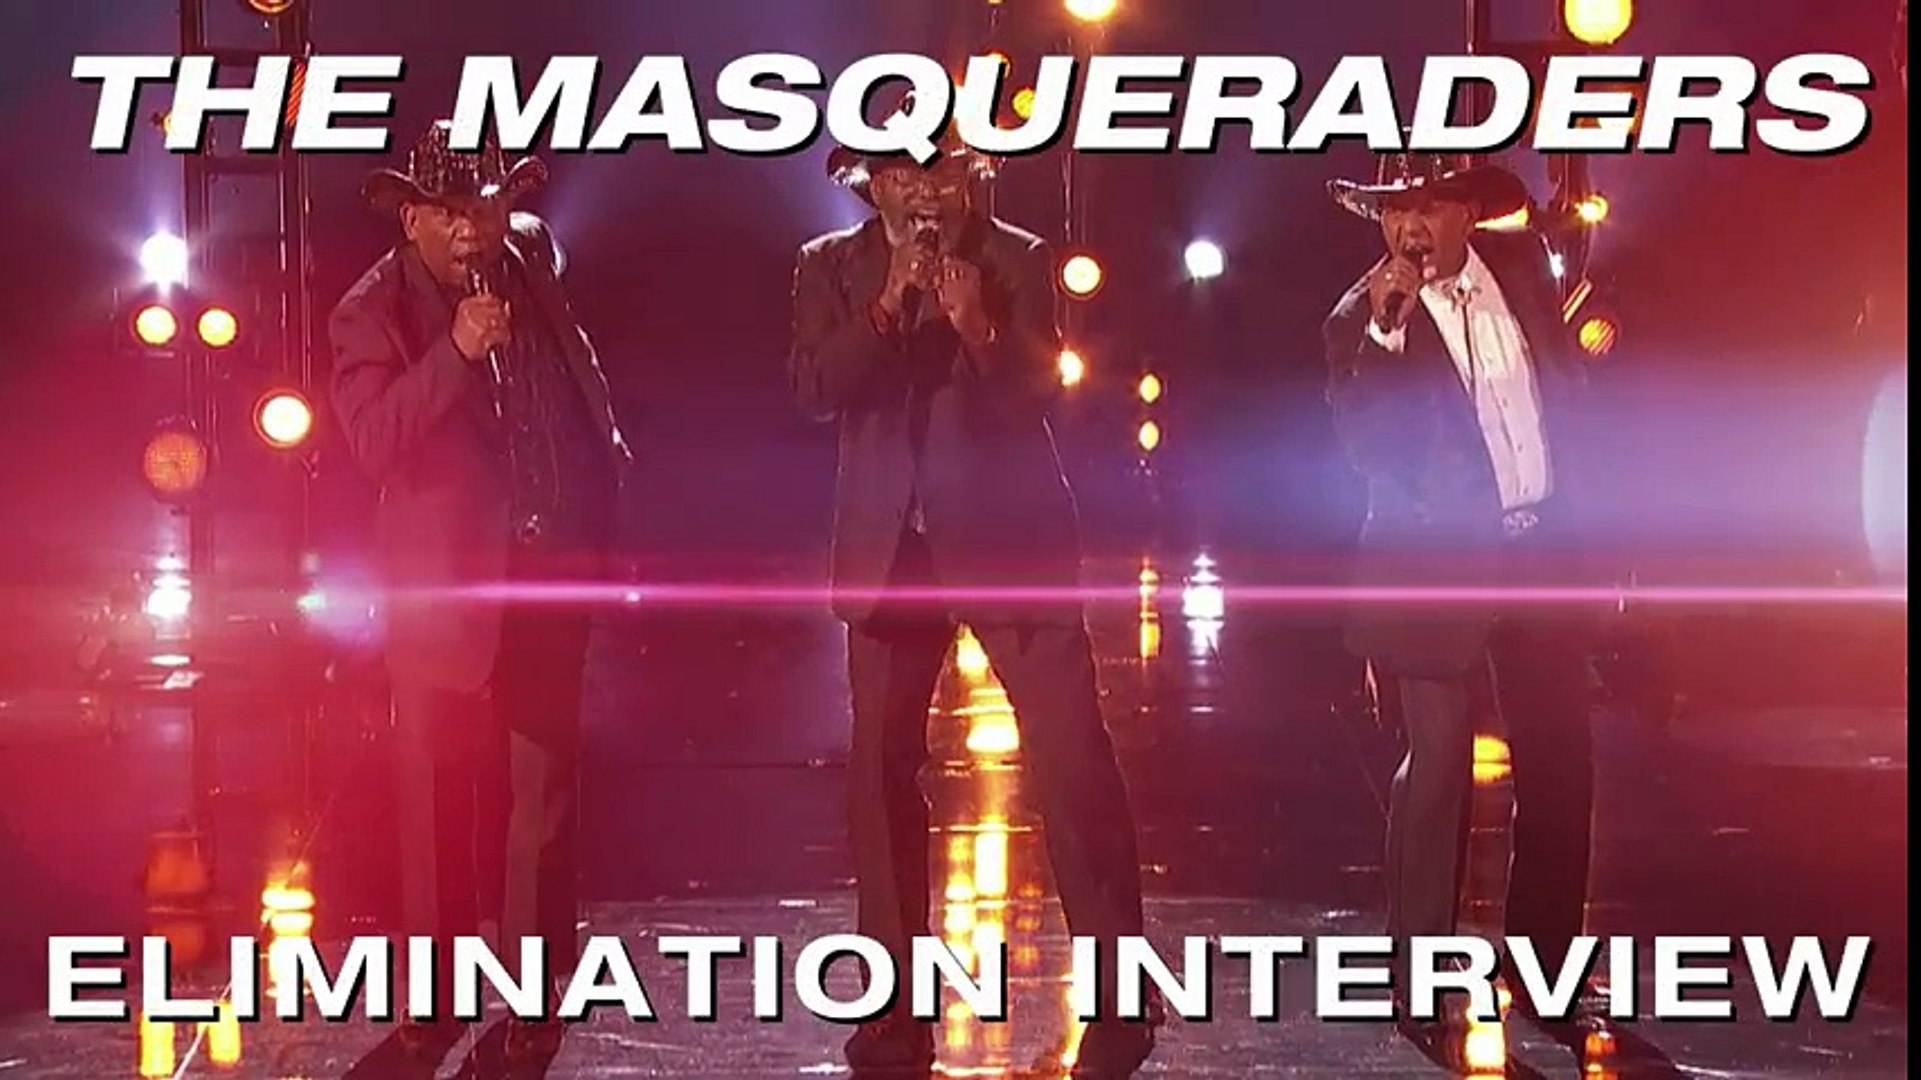 Elimination Interview- The Masqueraders Thank America For Their Support - America's Got Talent 